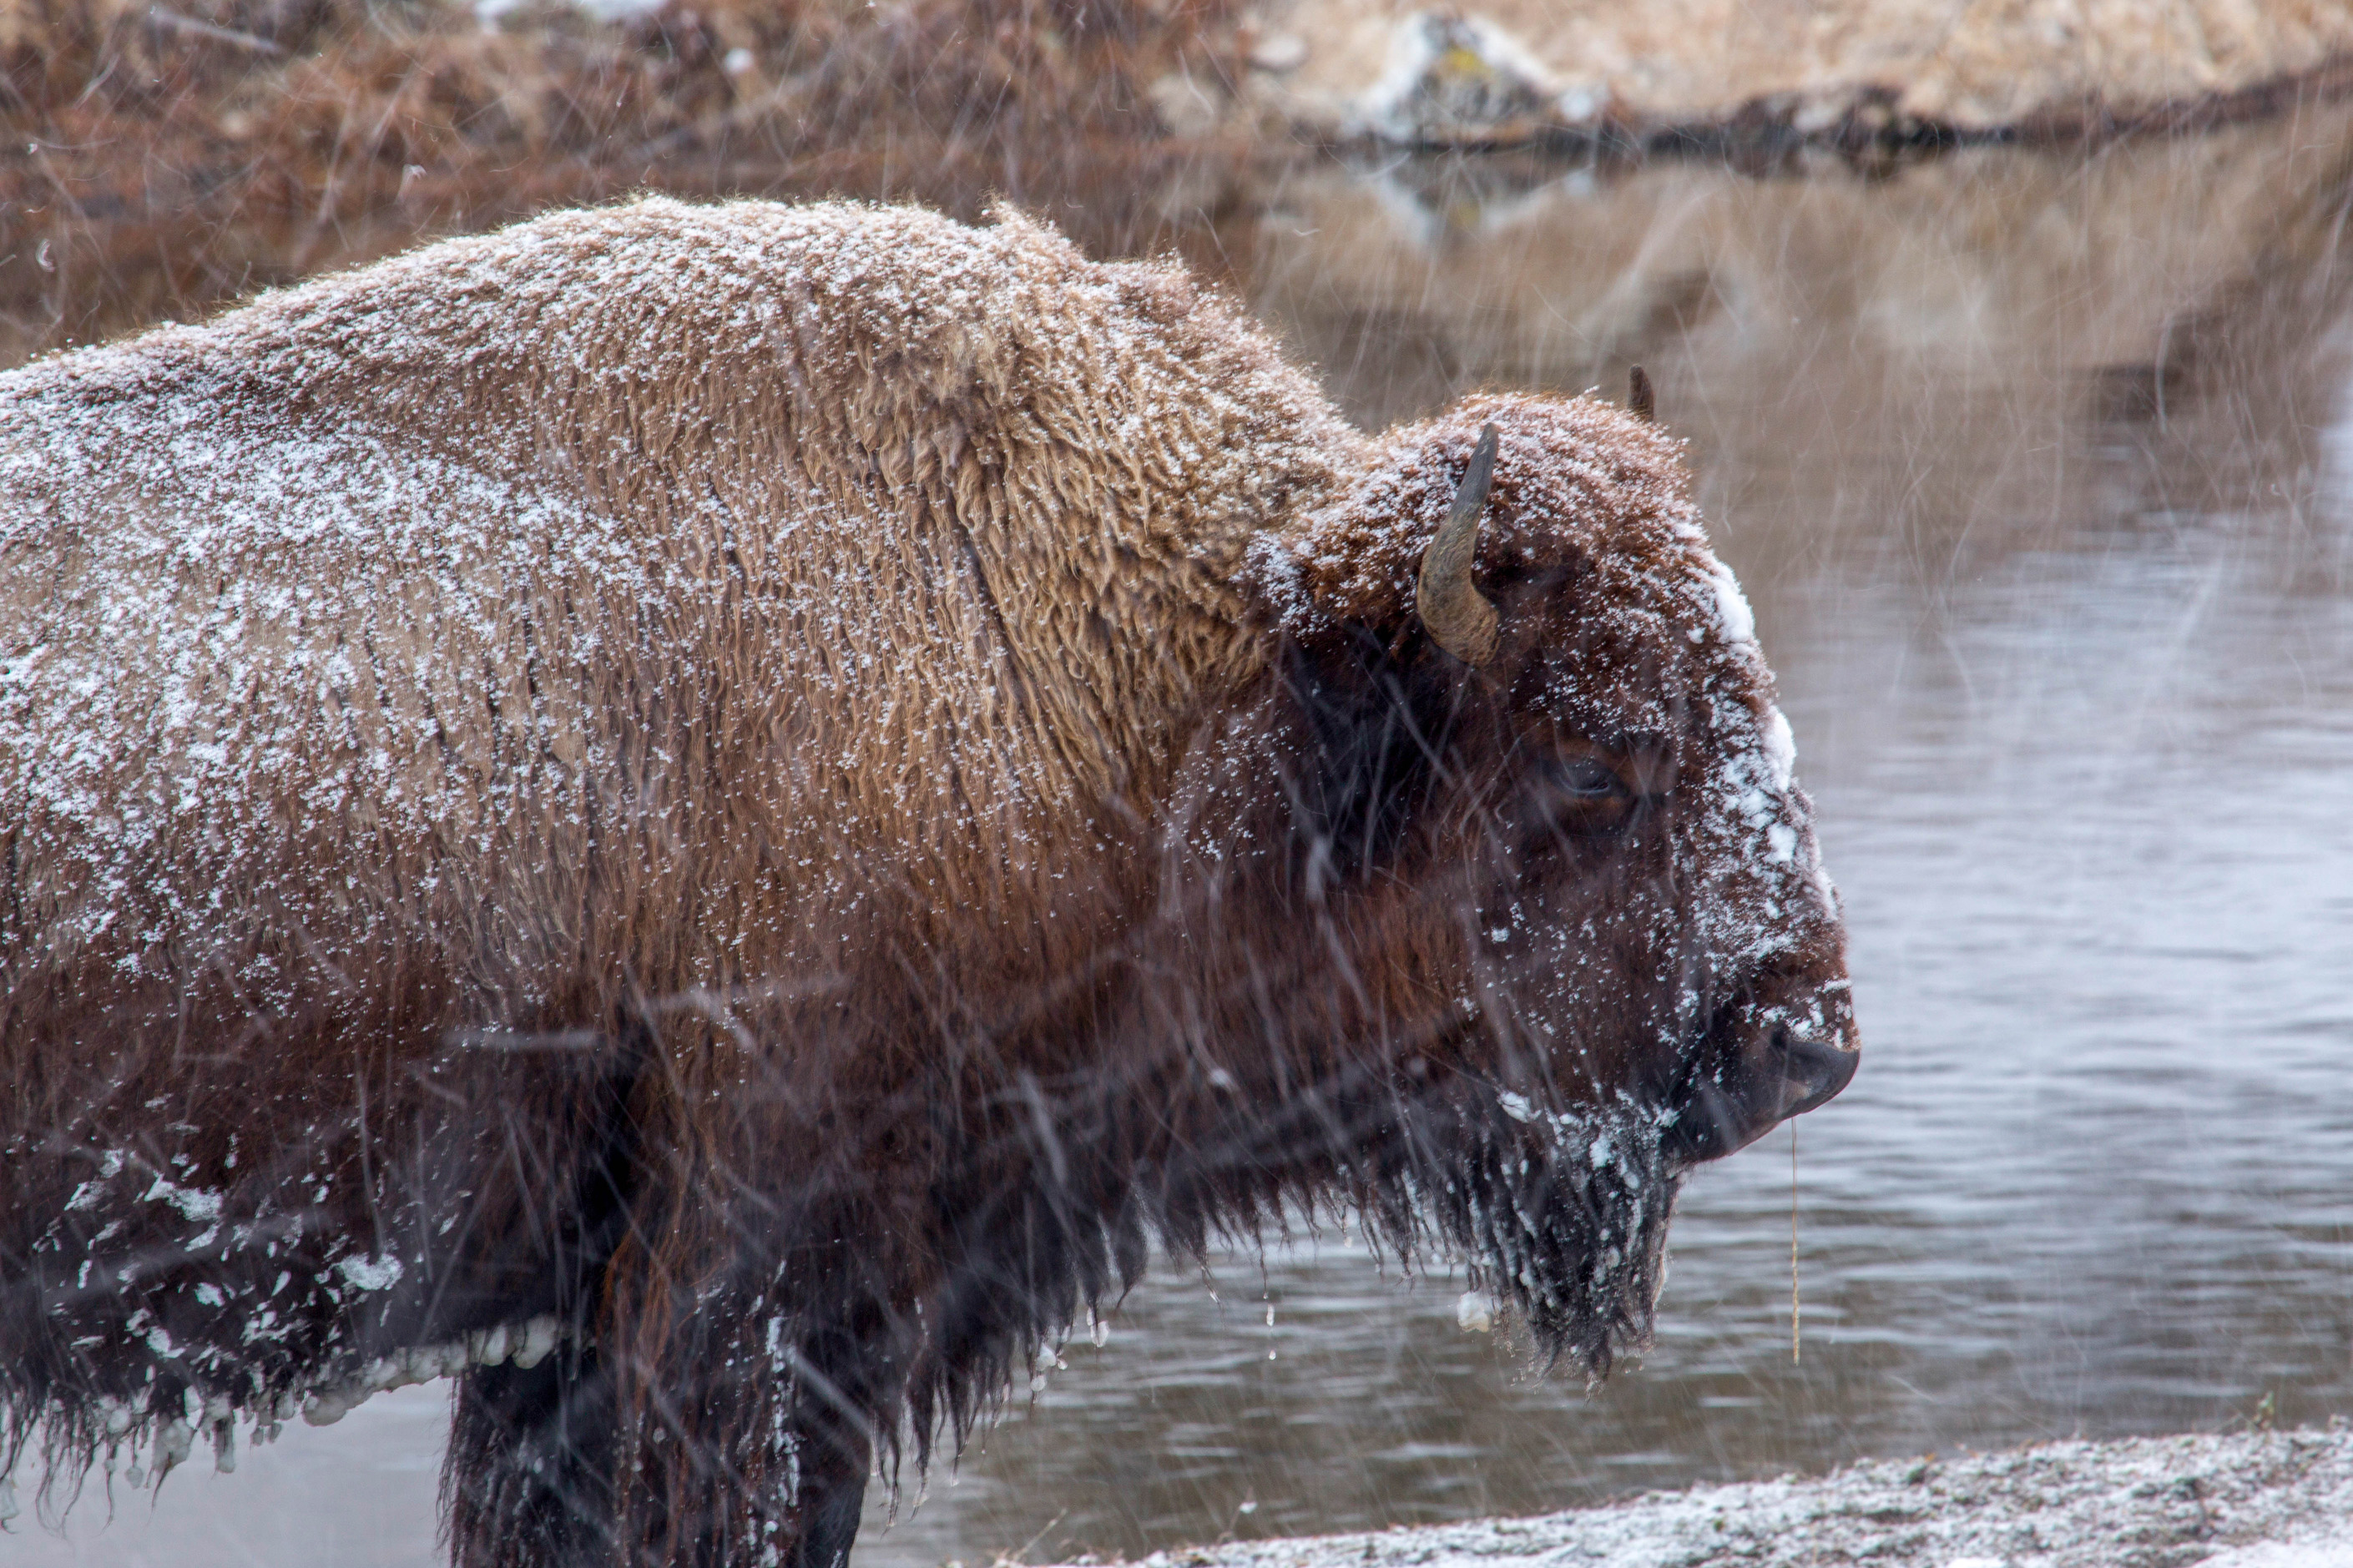 Bison is wet from snow and standing by a river.